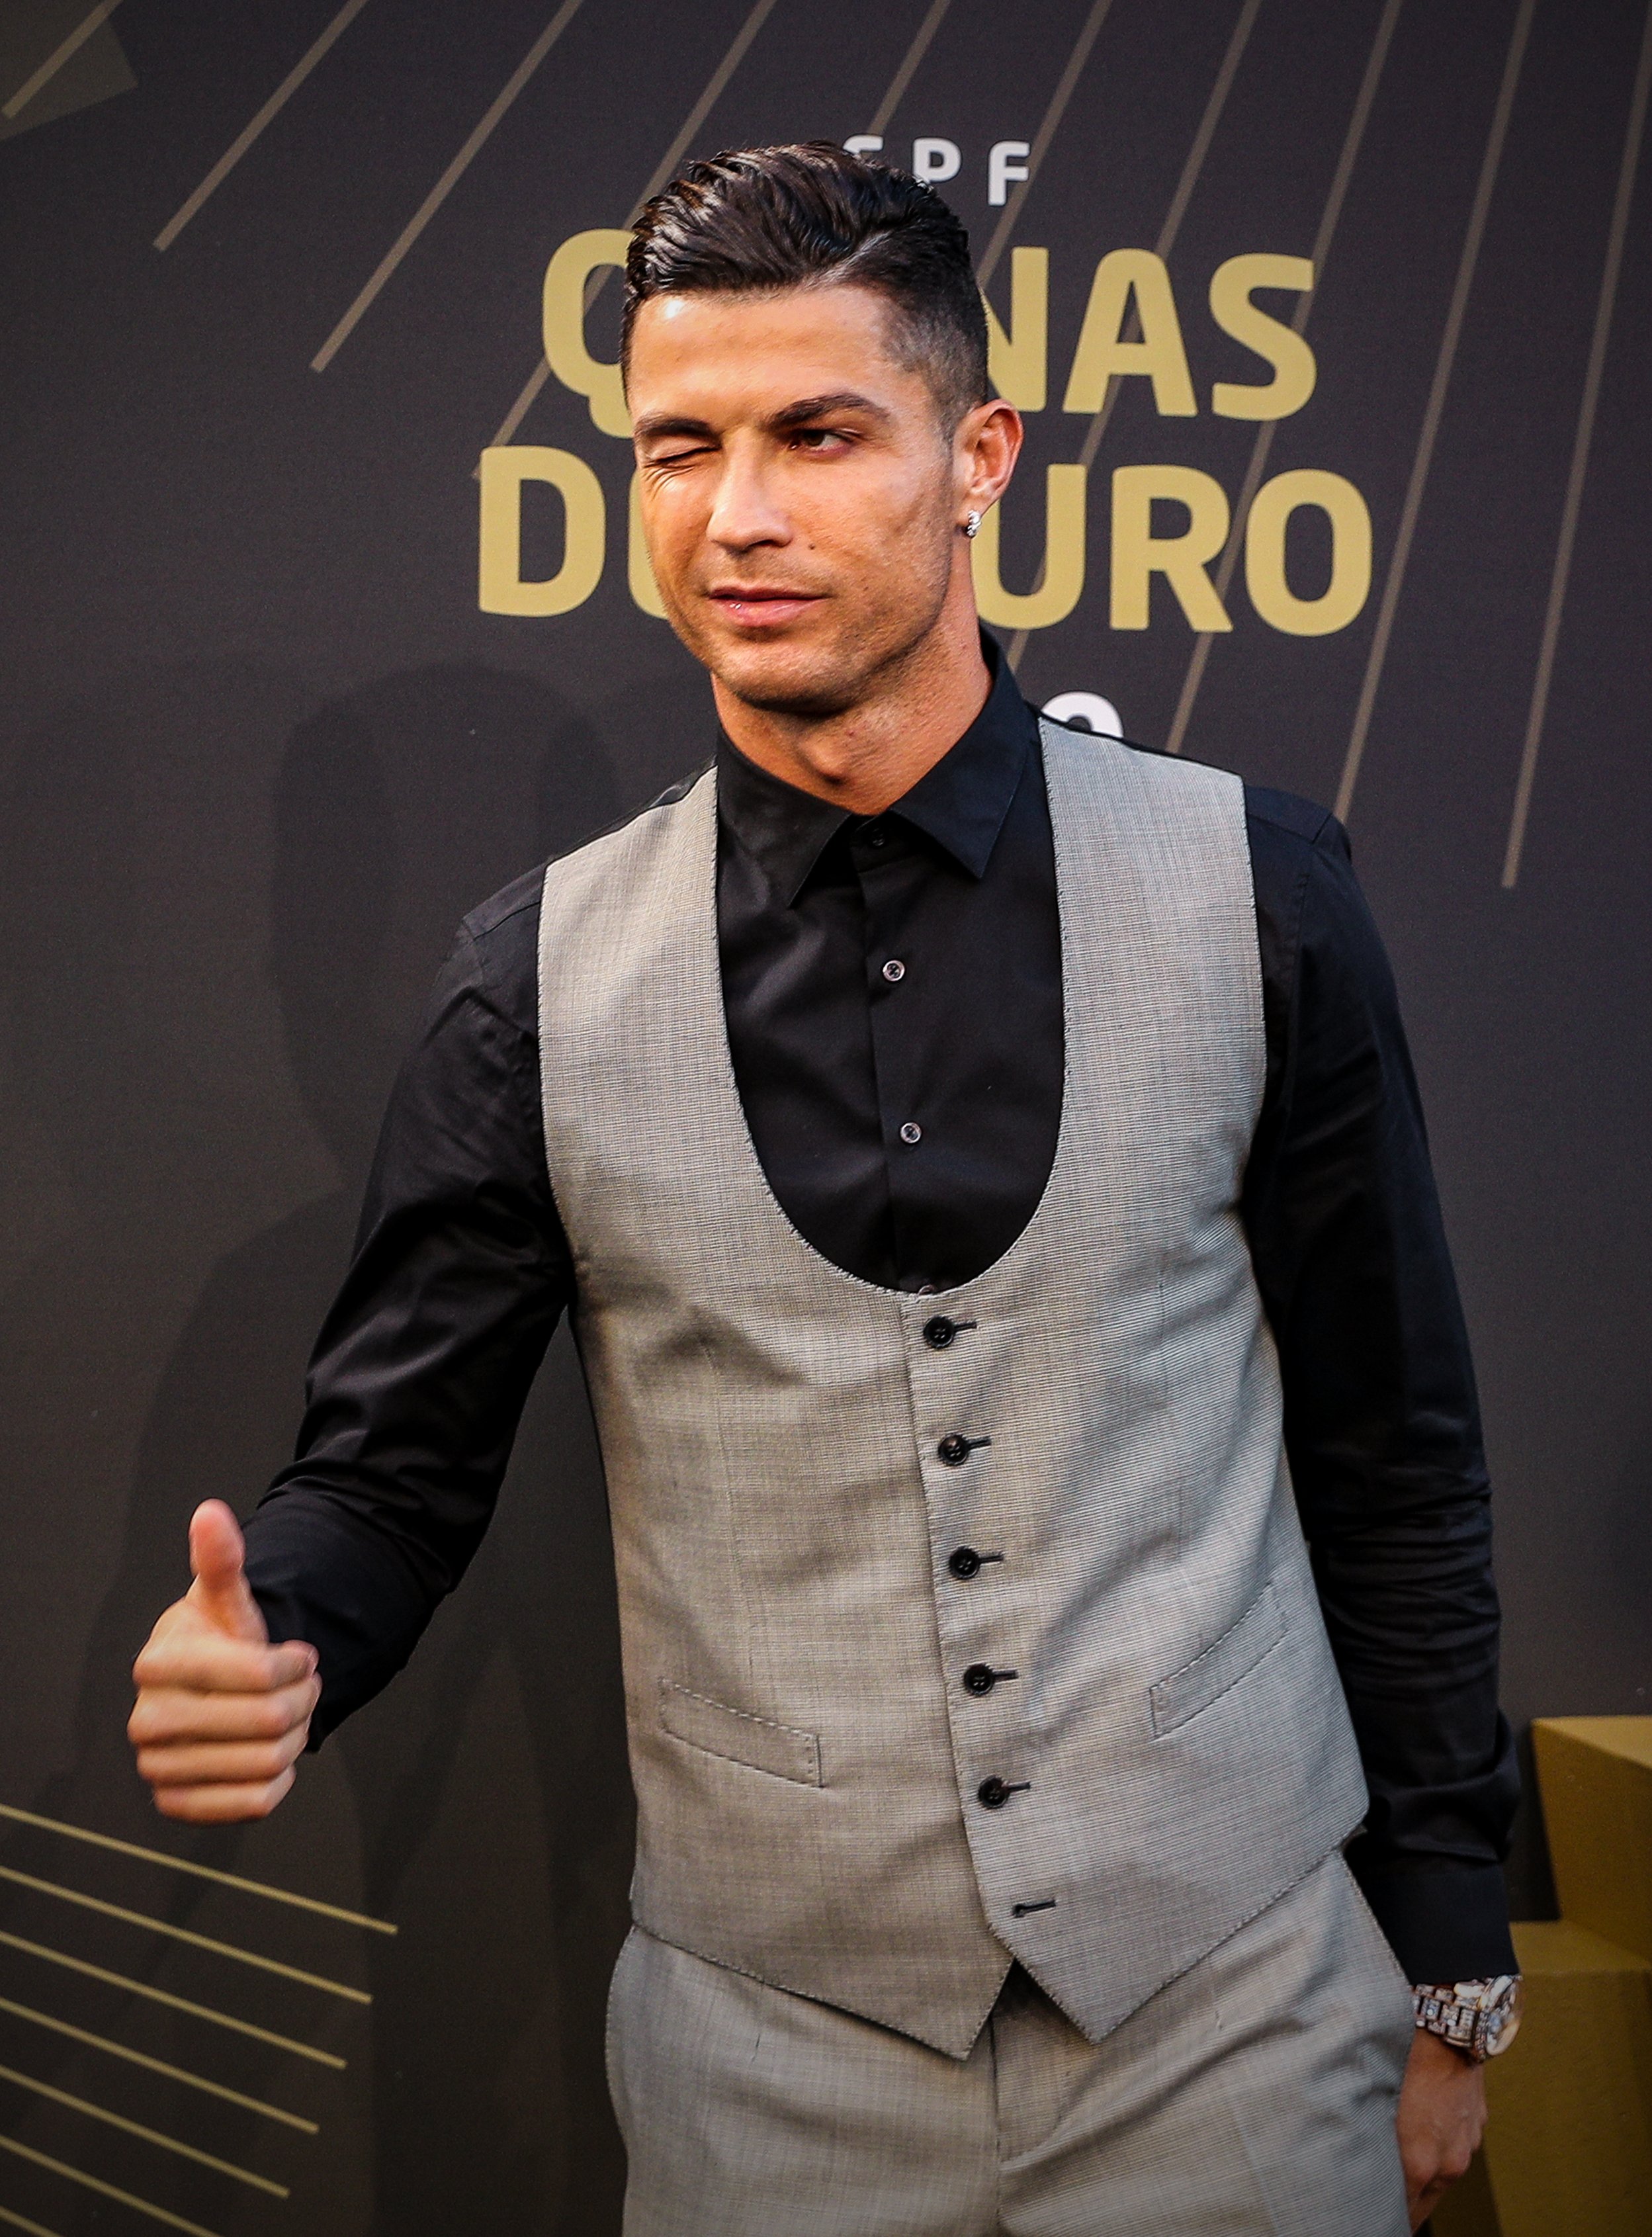 Ronaldo once again won the Portuguese player of the year award — FirstTouch